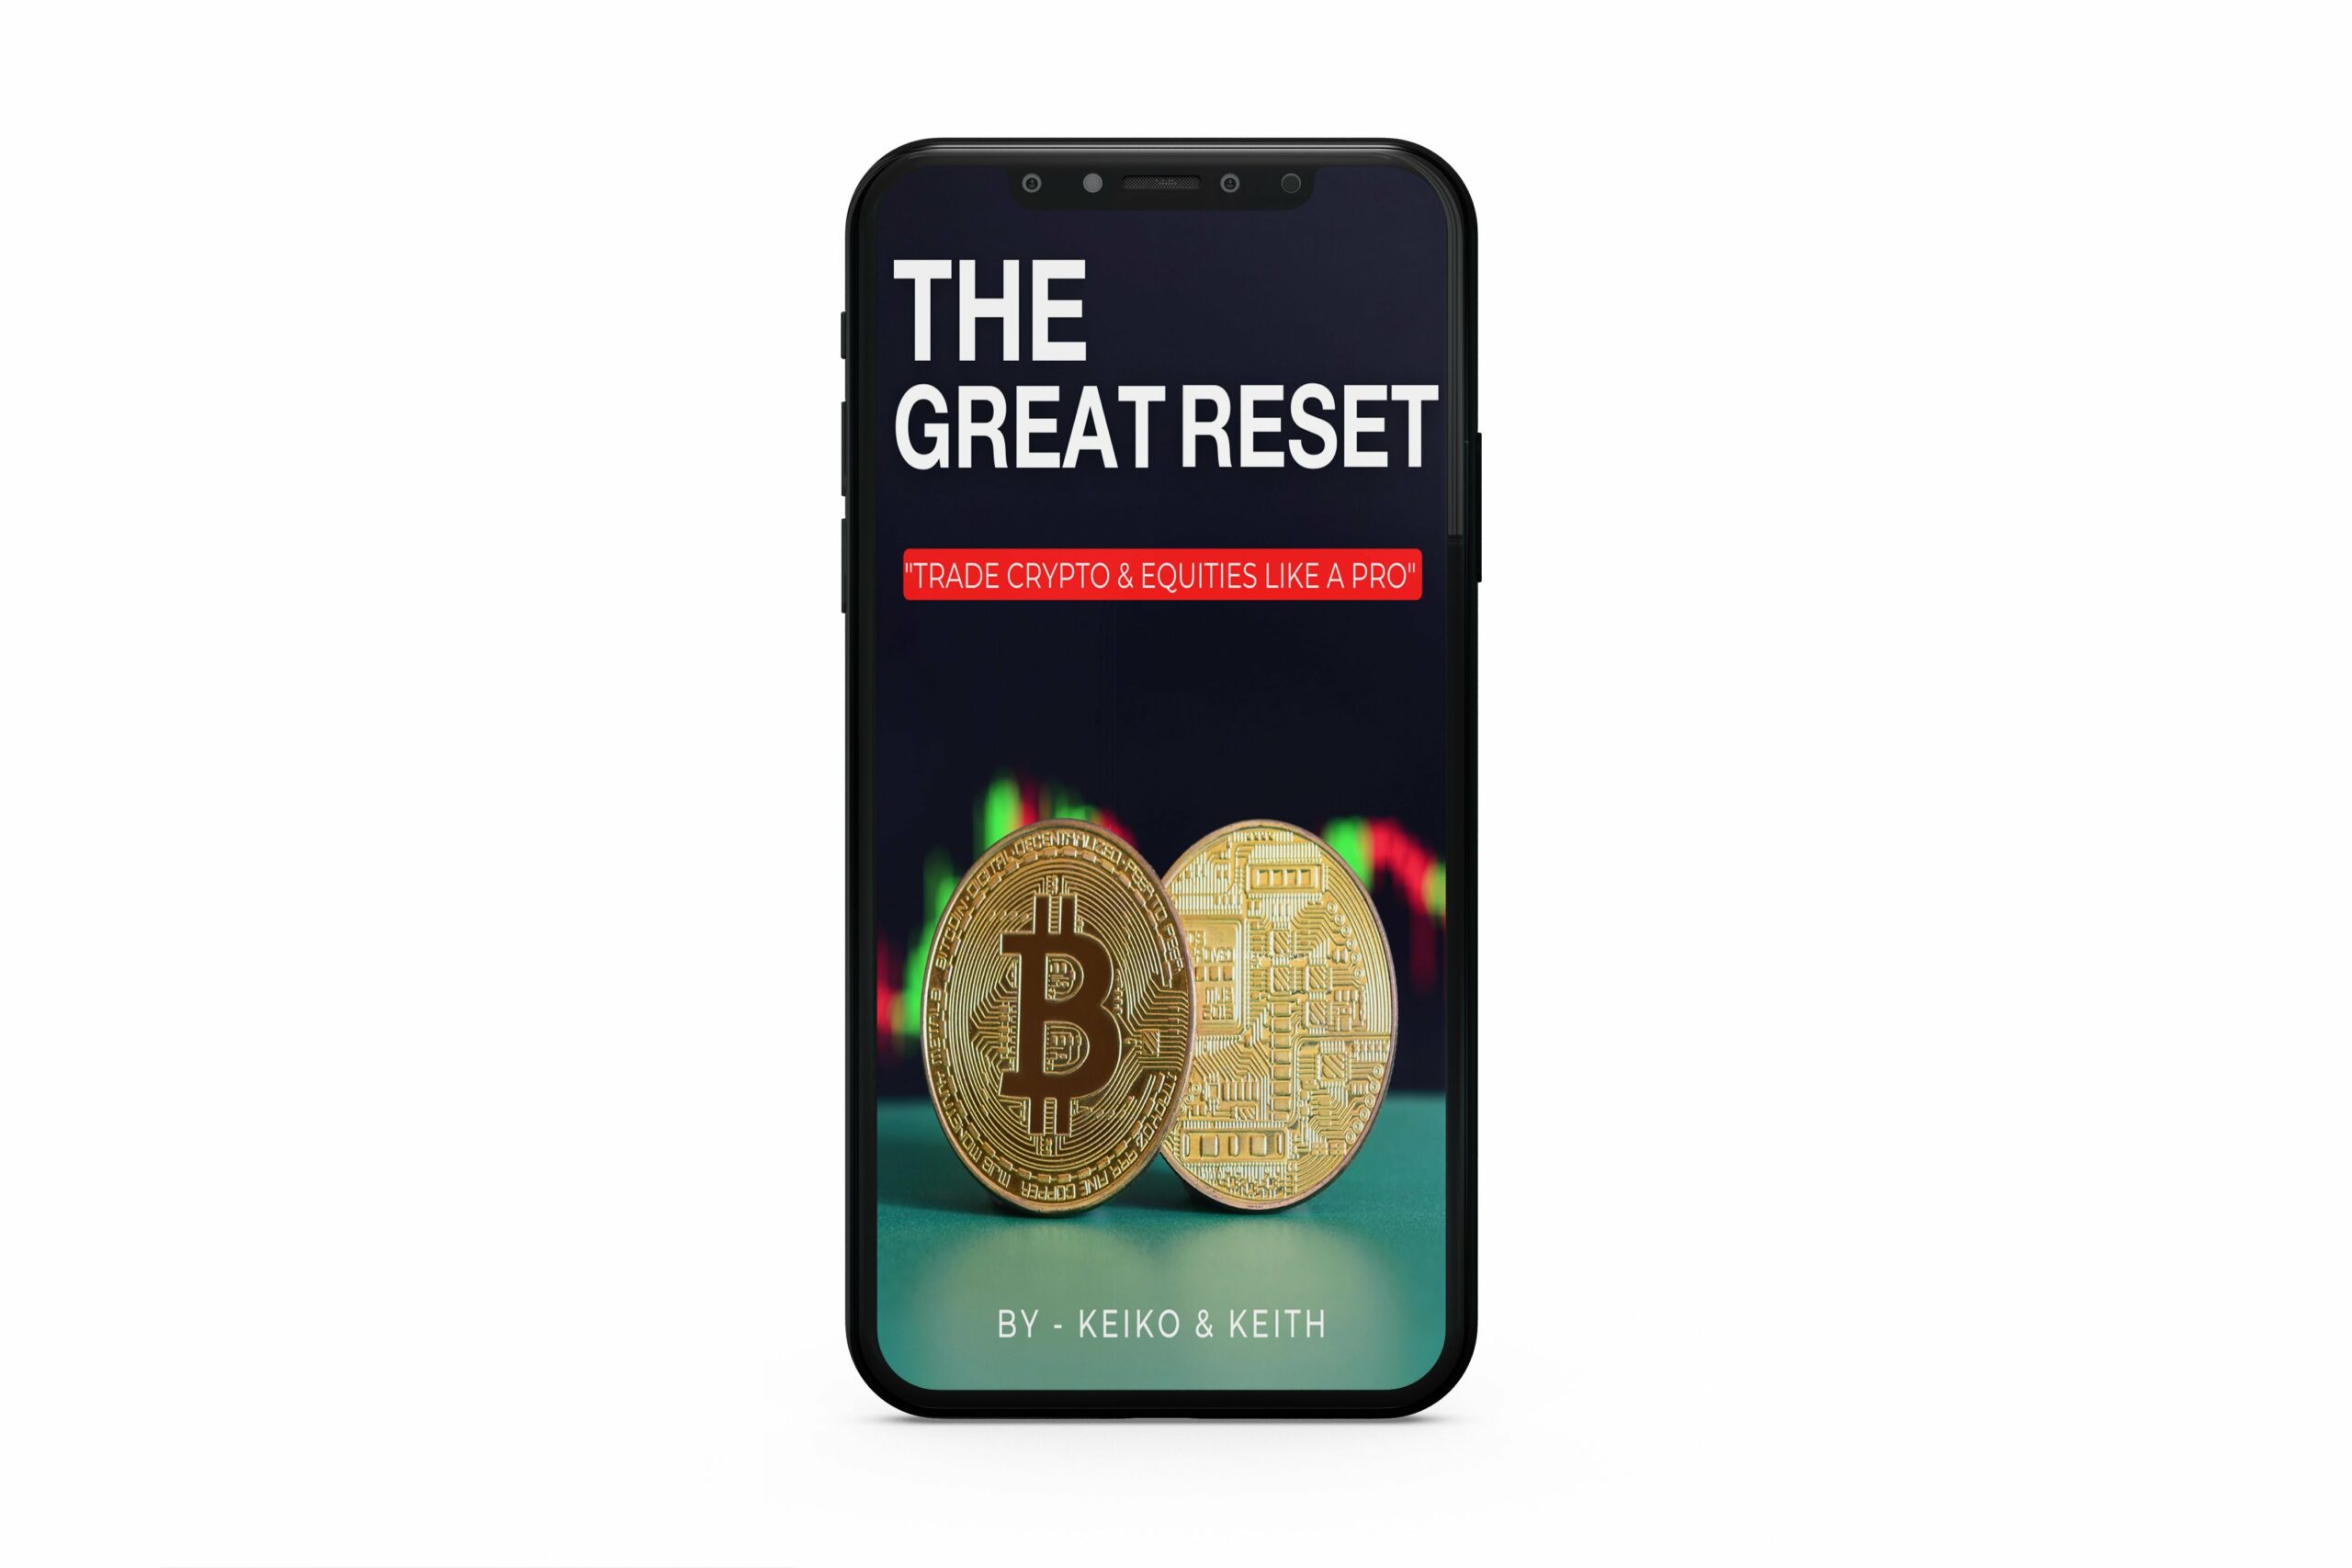 THE GREAT RESET CRYPTO & EQUITIES TRADING COURSE By KEIKO